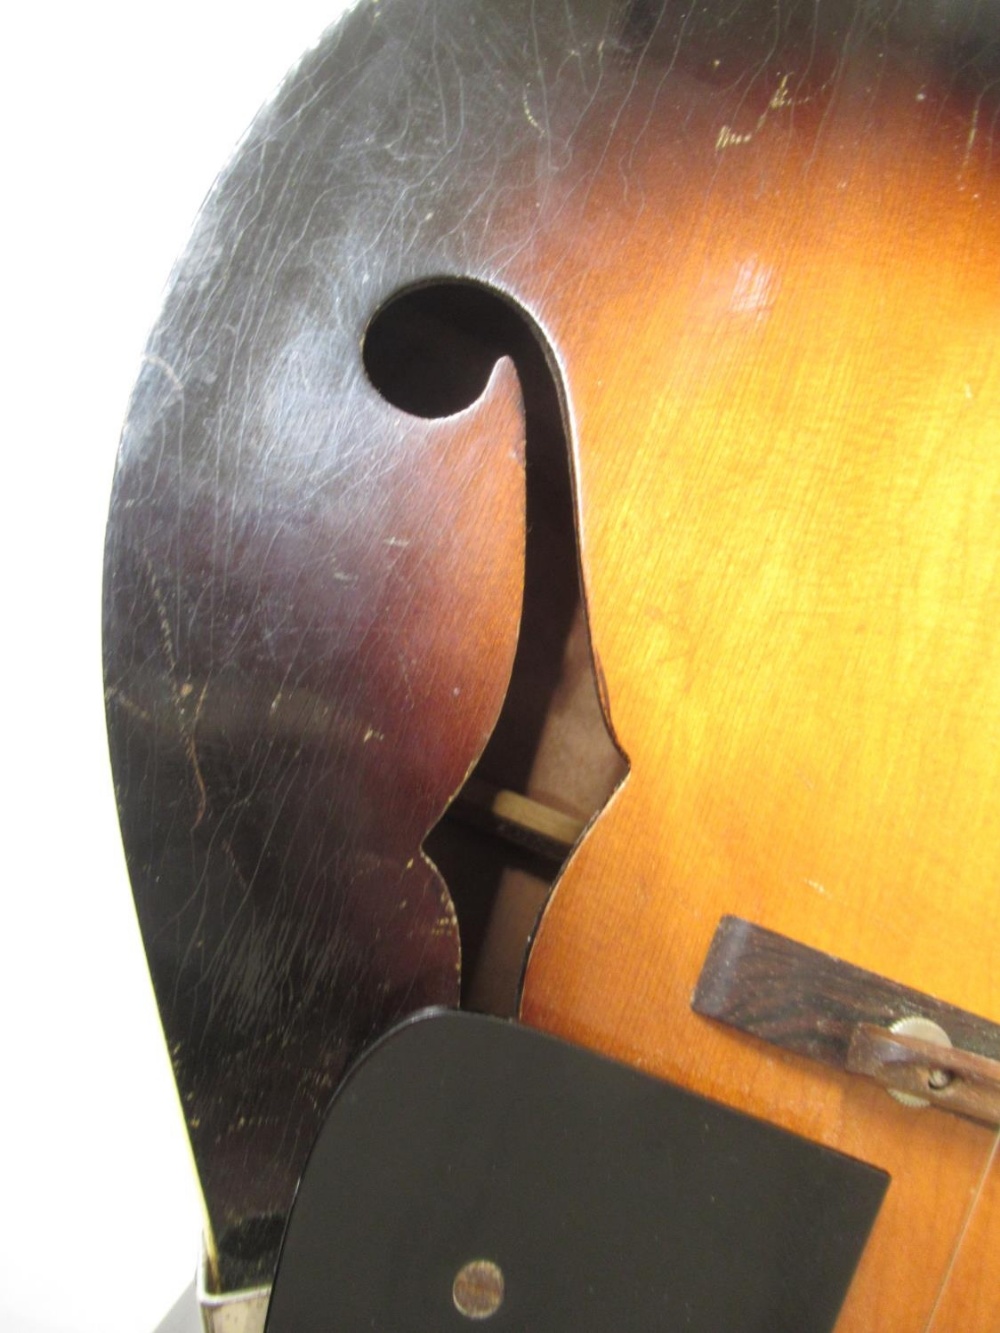 WITHDRAWN Kalamazoo by Gibson circa 1940s 6 string acoustic guitar, lacking Gibson sticker, serial n - Image 5 of 9